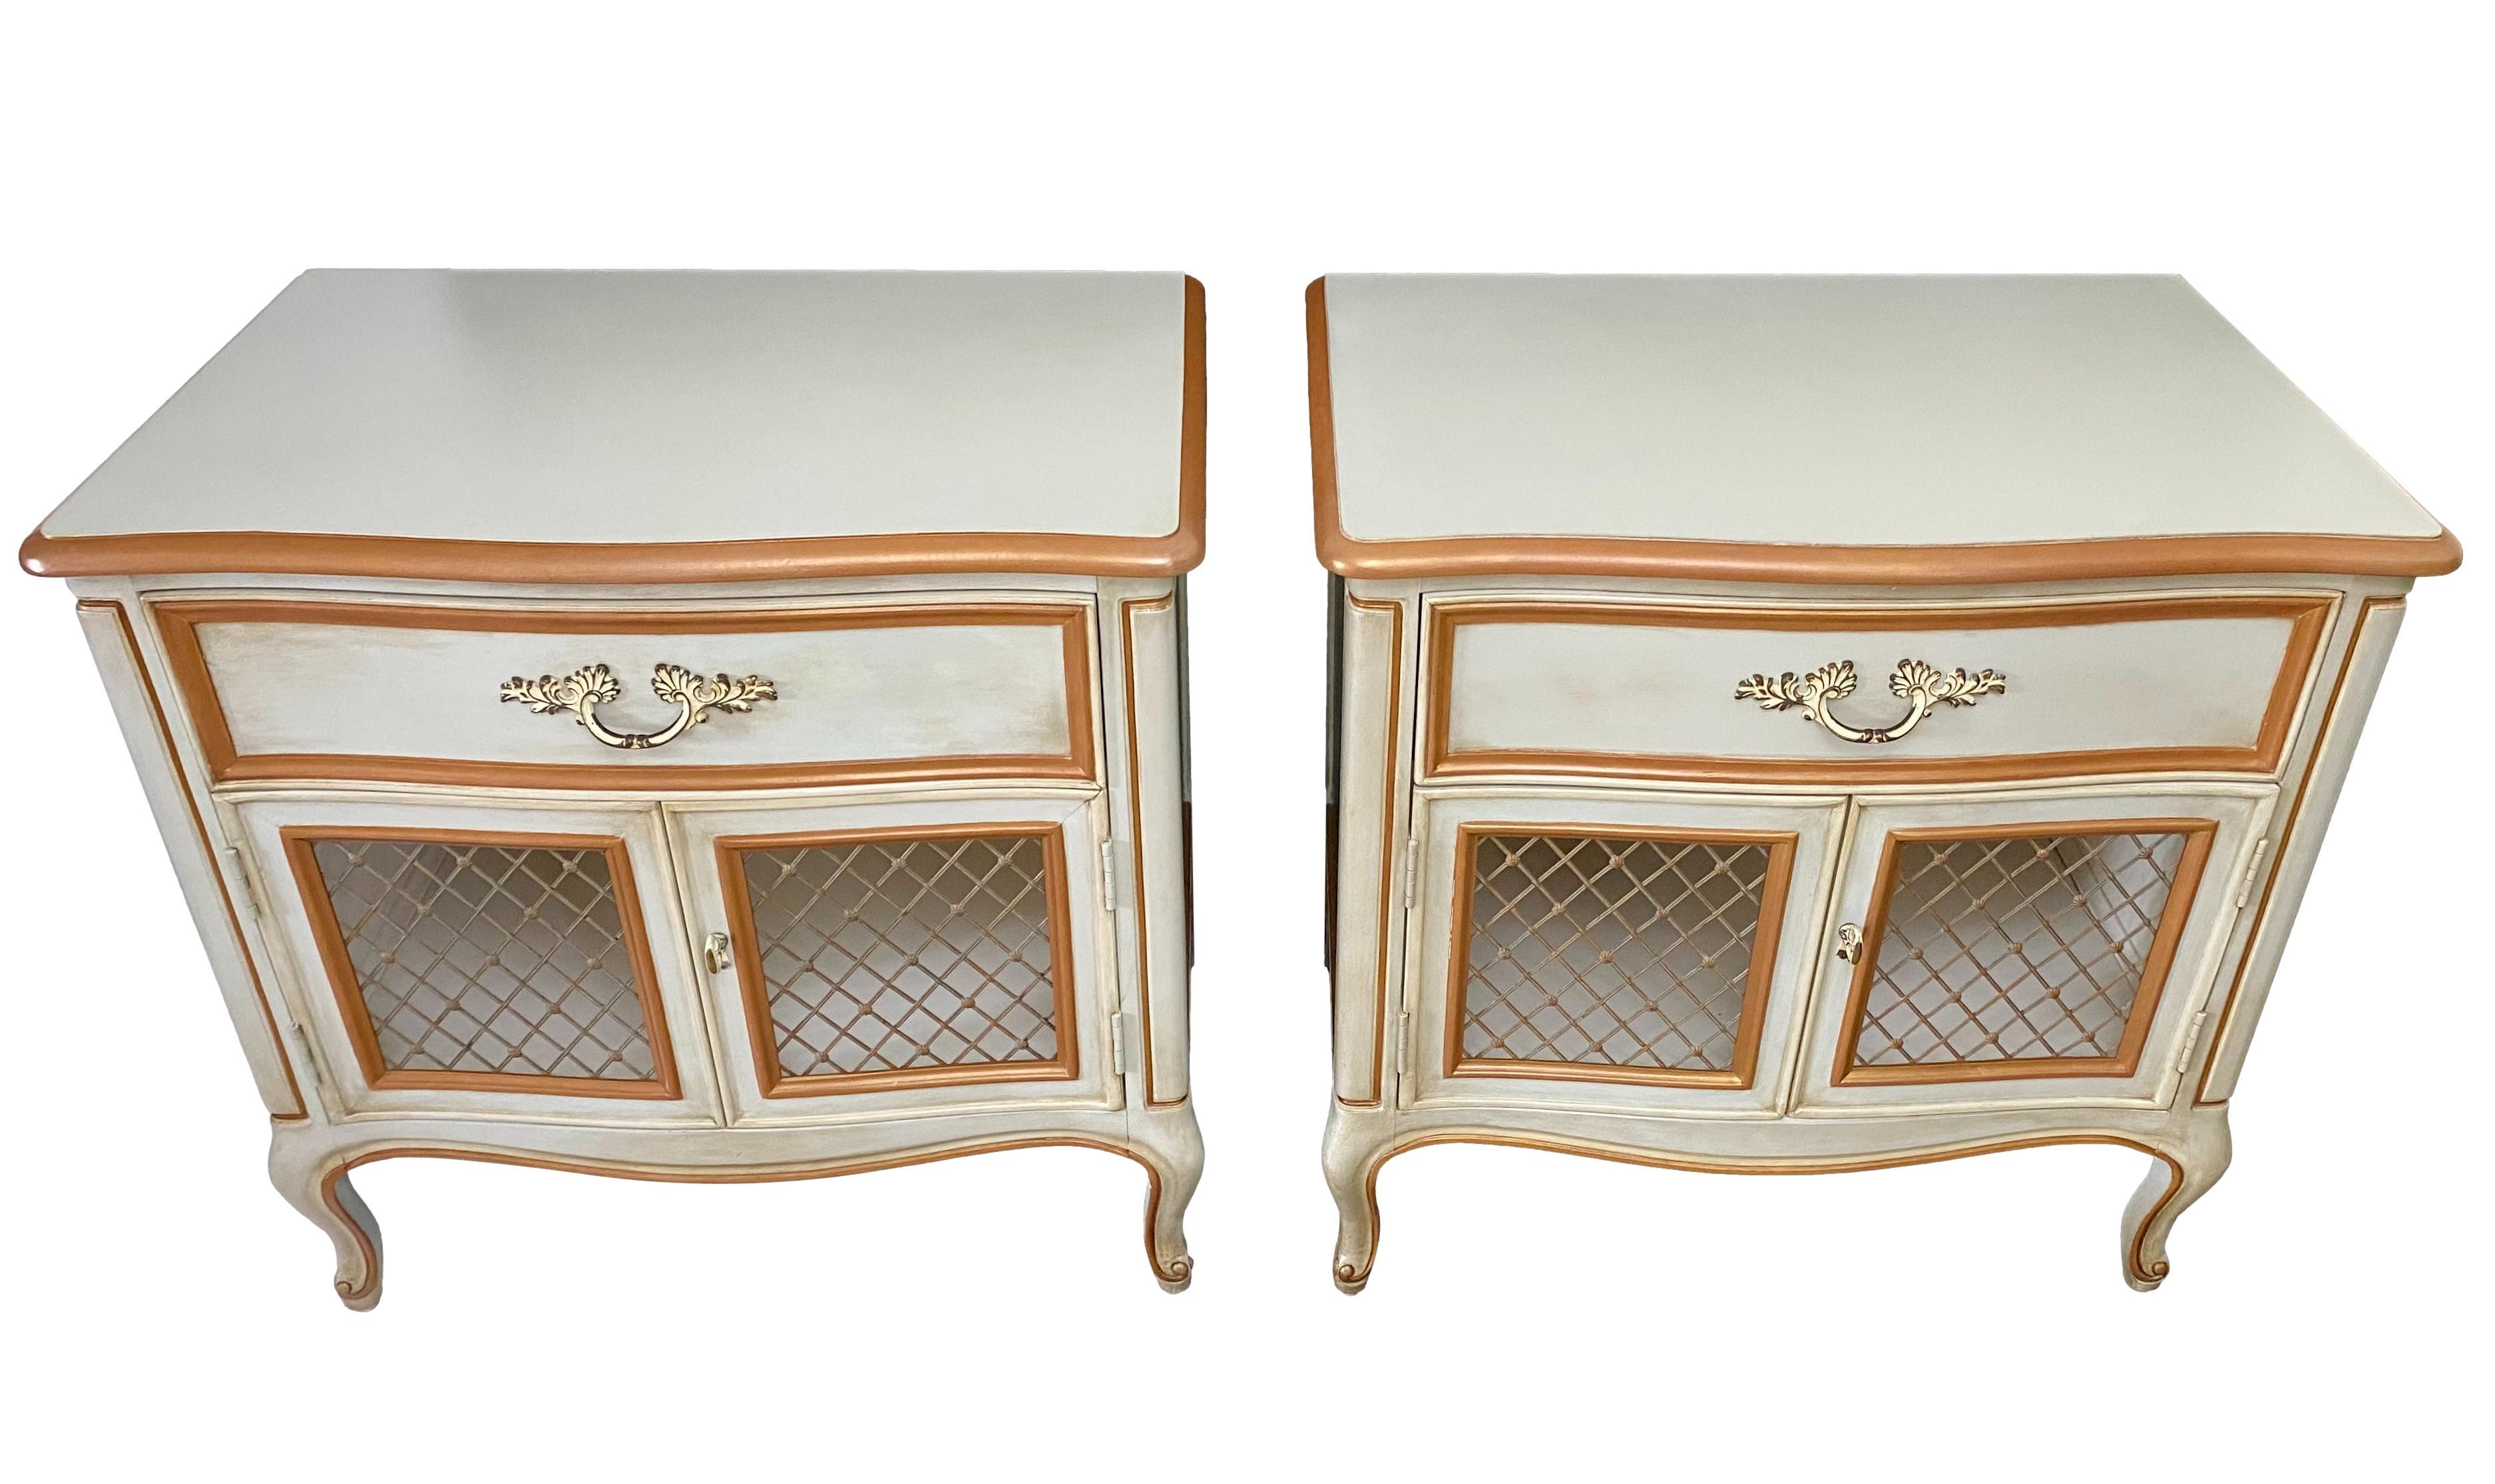 French Provincial Vintage Henredon Louis XV Provincial Nightstands, a Refinished Pair